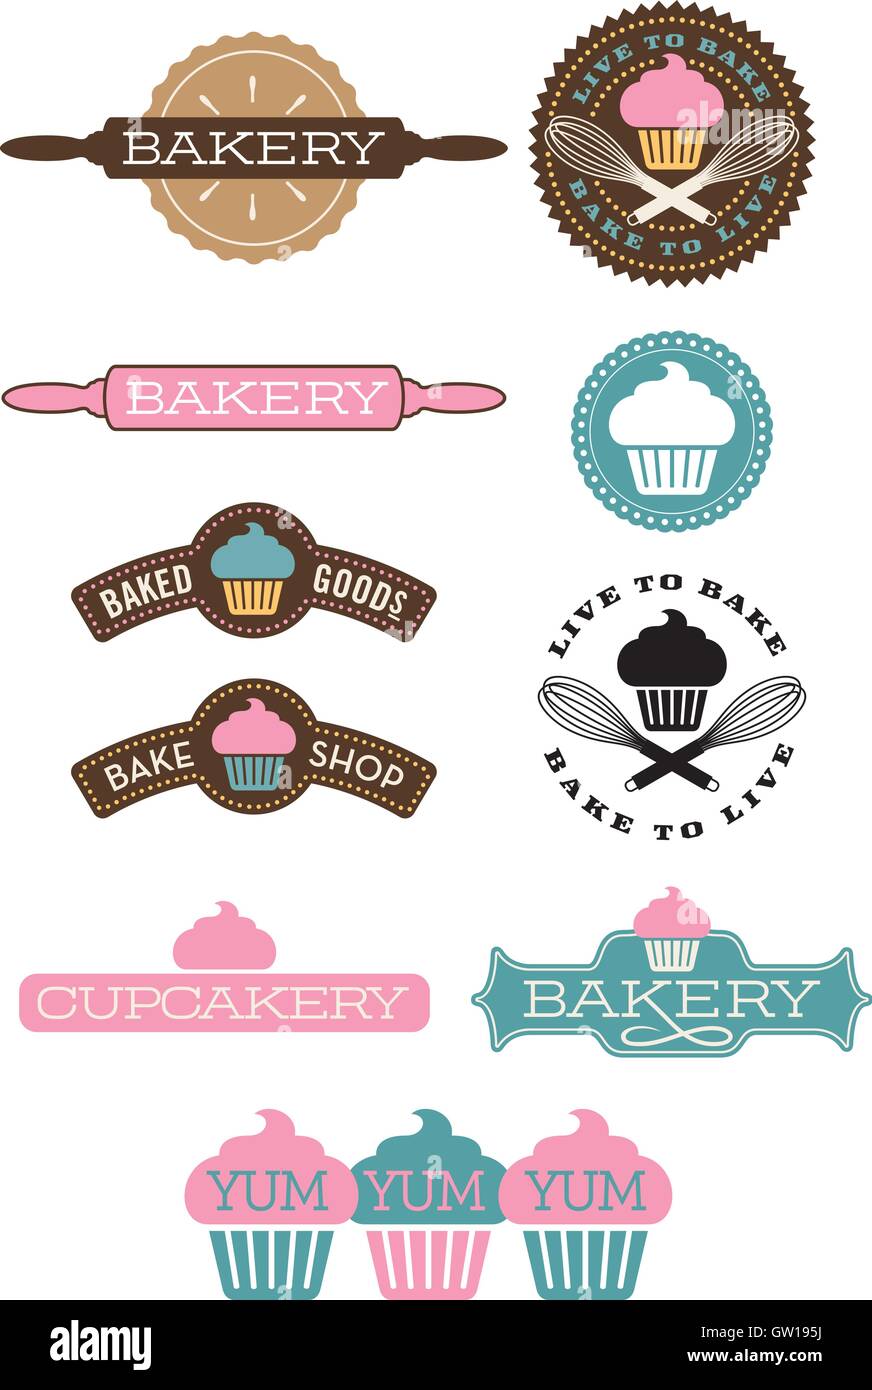 Set Of 10 Bakery Vector Design Elements Great For Signs Posters